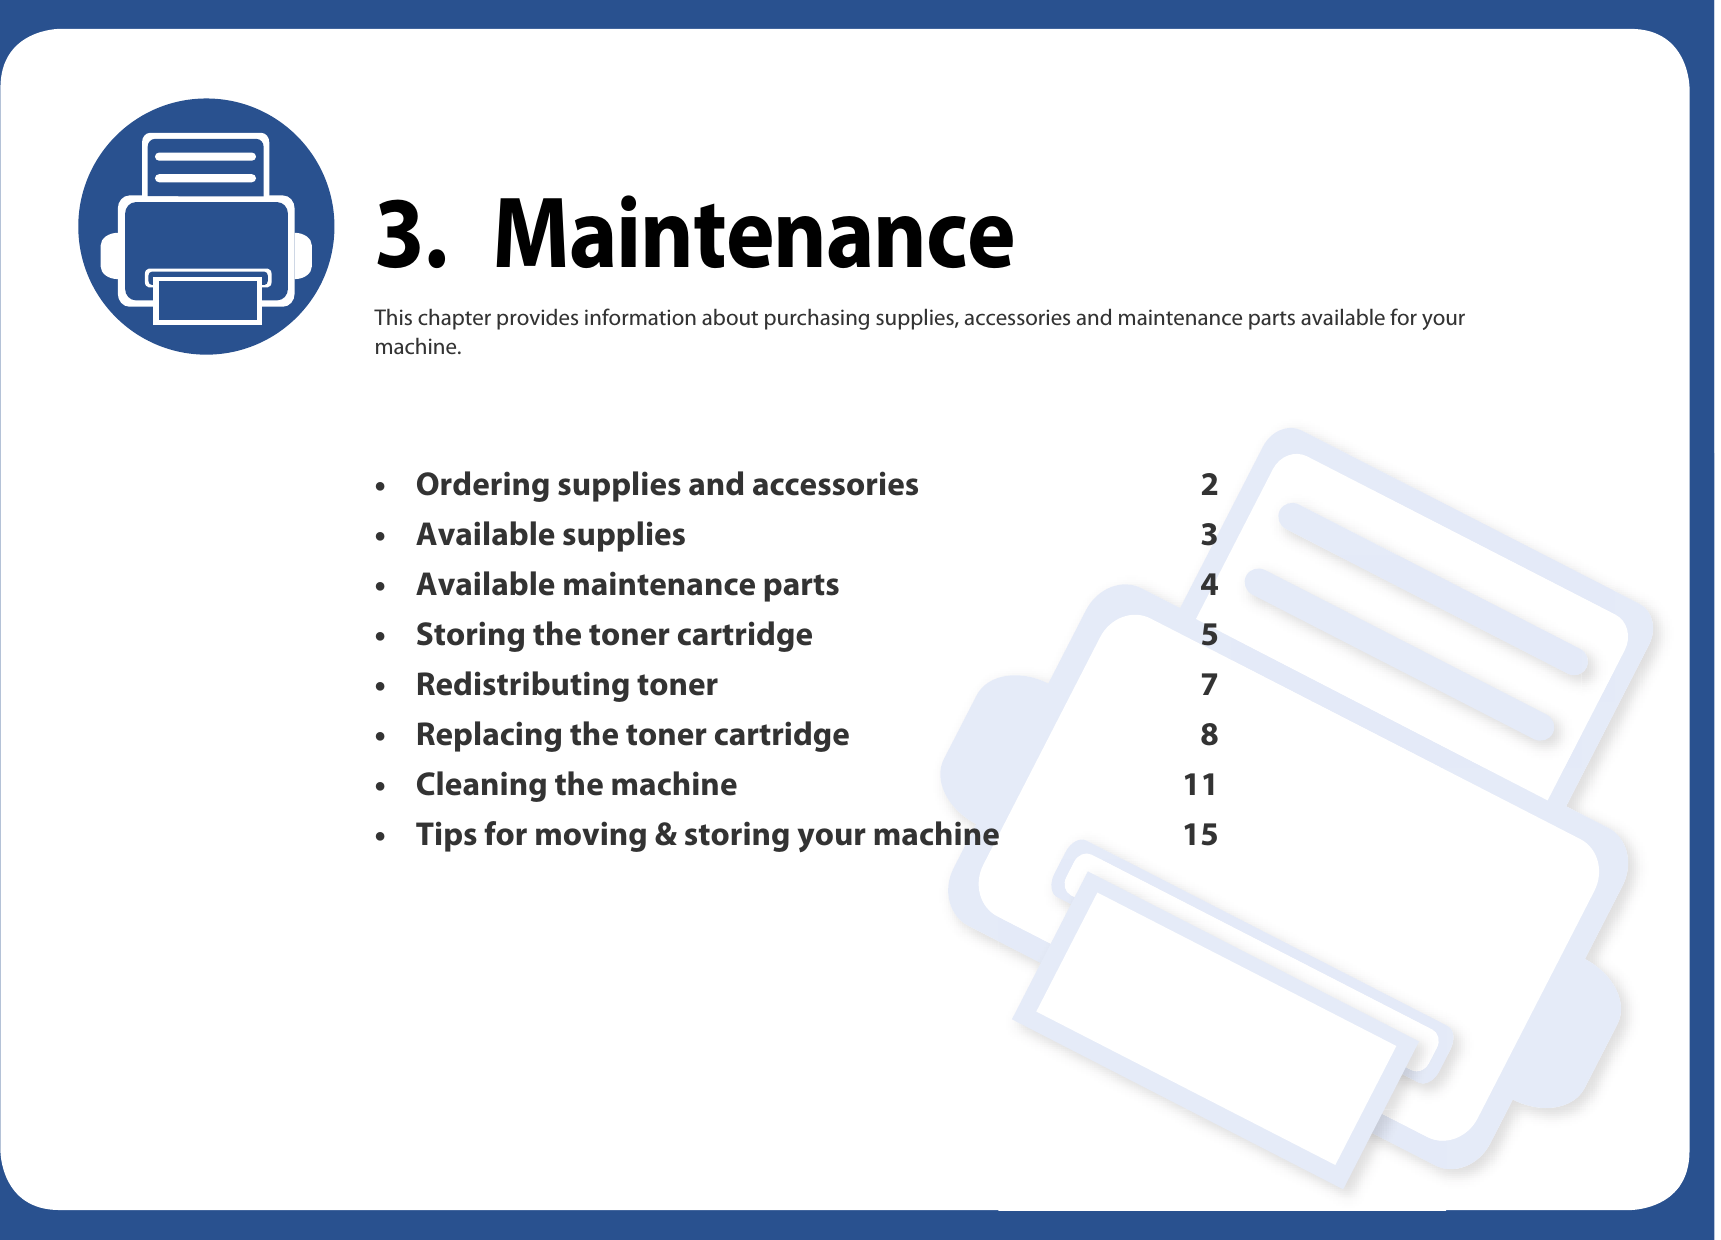 3. MaintenanceThis chapter provides information about purchasing supplies, accessories and maintenance parts available for your machine.• Ordering supplies and accessories 2• Available supplies 3• Available maintenance parts 4• Storing the toner cartridge 5• Redistributing toner 7• Replacing the toner cartridge 8• Cleaning the machine 11• Tips for moving &amp; storing your machine 15